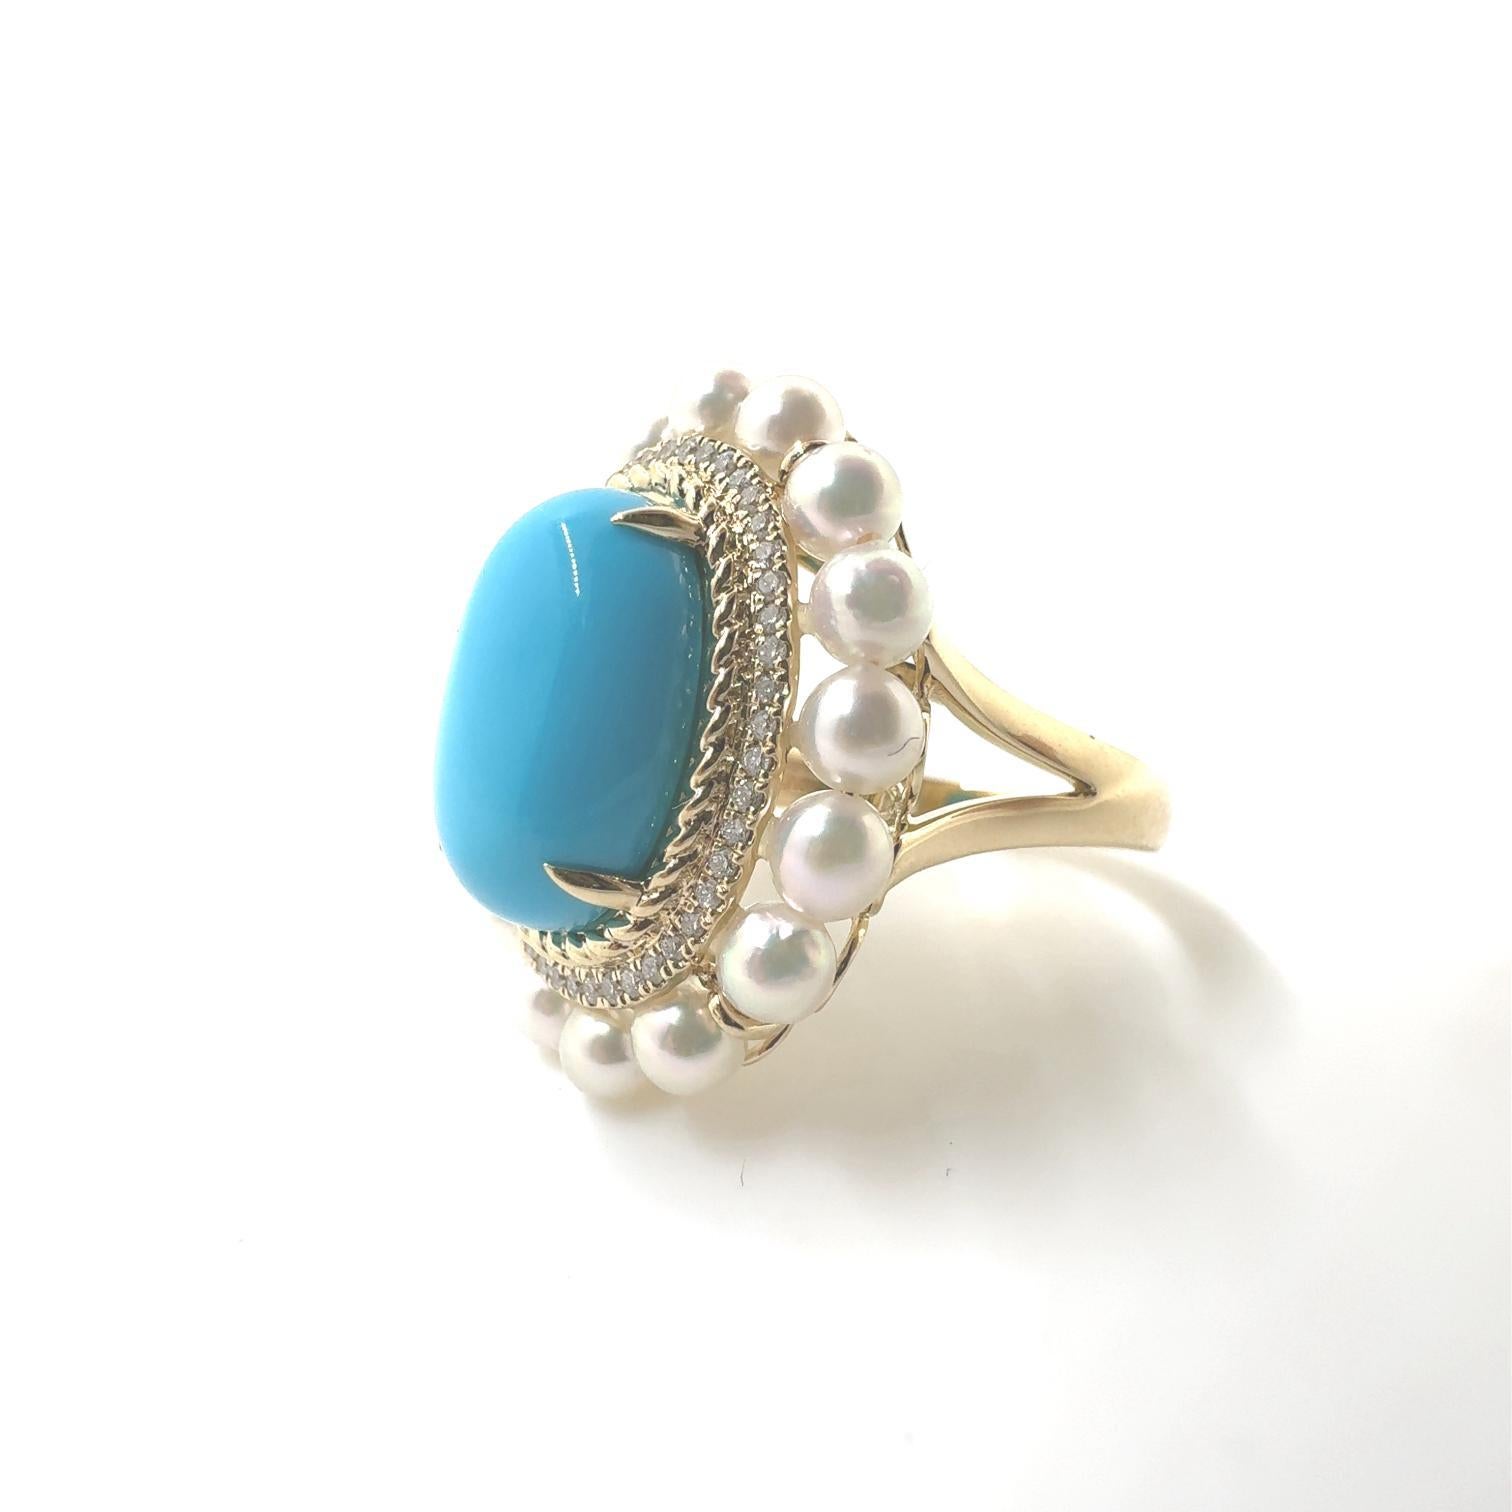 5.15Ct Turquoise Cabochon Pearl Diamond Ring in 14 Karat Yellow Gold For Sale 1